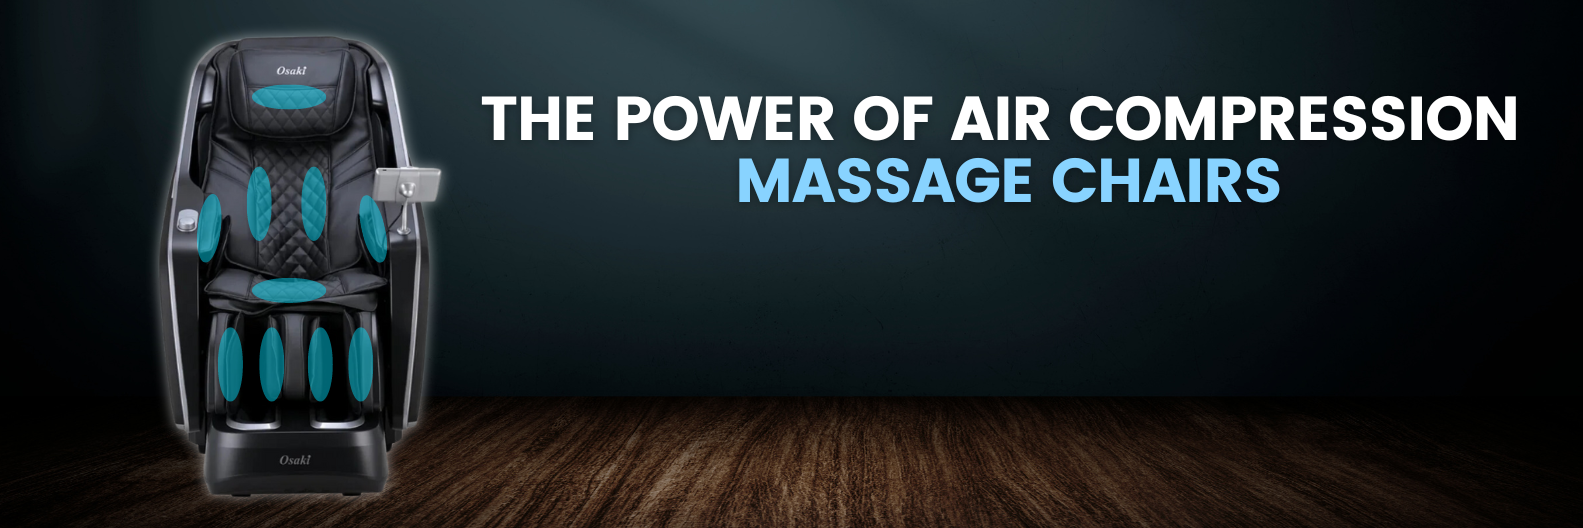 Discover the wonders of air massage chairs and their role in enhancing relaxation. Delve into various types and techniques for a serene and blissful massage experience.